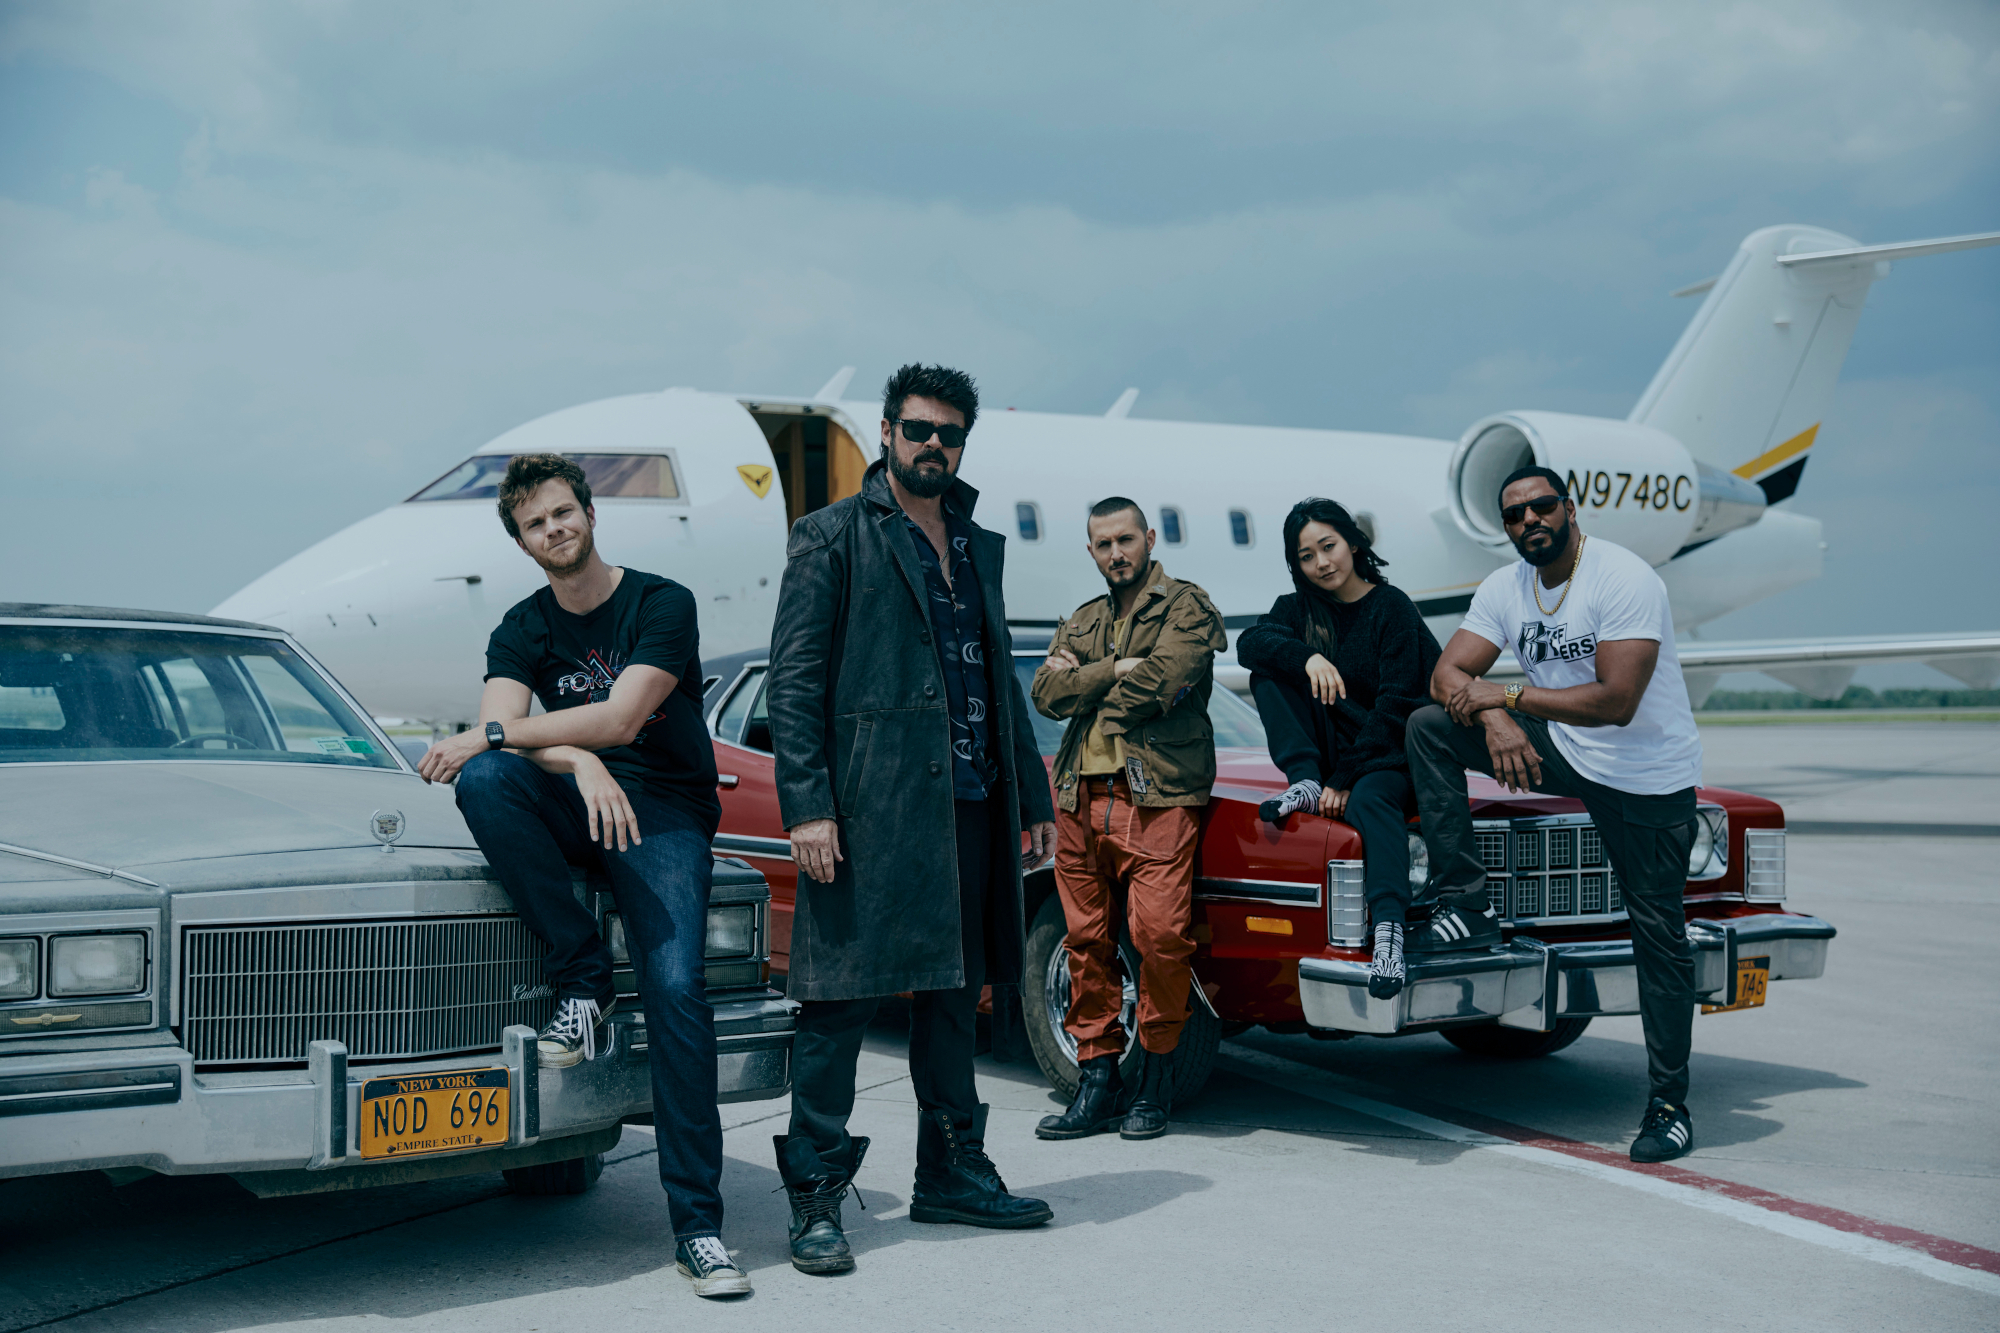 Jack Quaid (Hughie Campbell), Karl Urban (Billy Butcher), Tomer Capone (Frenchie), Karen Fukuhara (Kimiko), and Laz Alonso (Mother's Milk) in a promotional photo for 'The Boys' Season 3, which set up season 4 with its ending. The group is standing in front of a white plane.